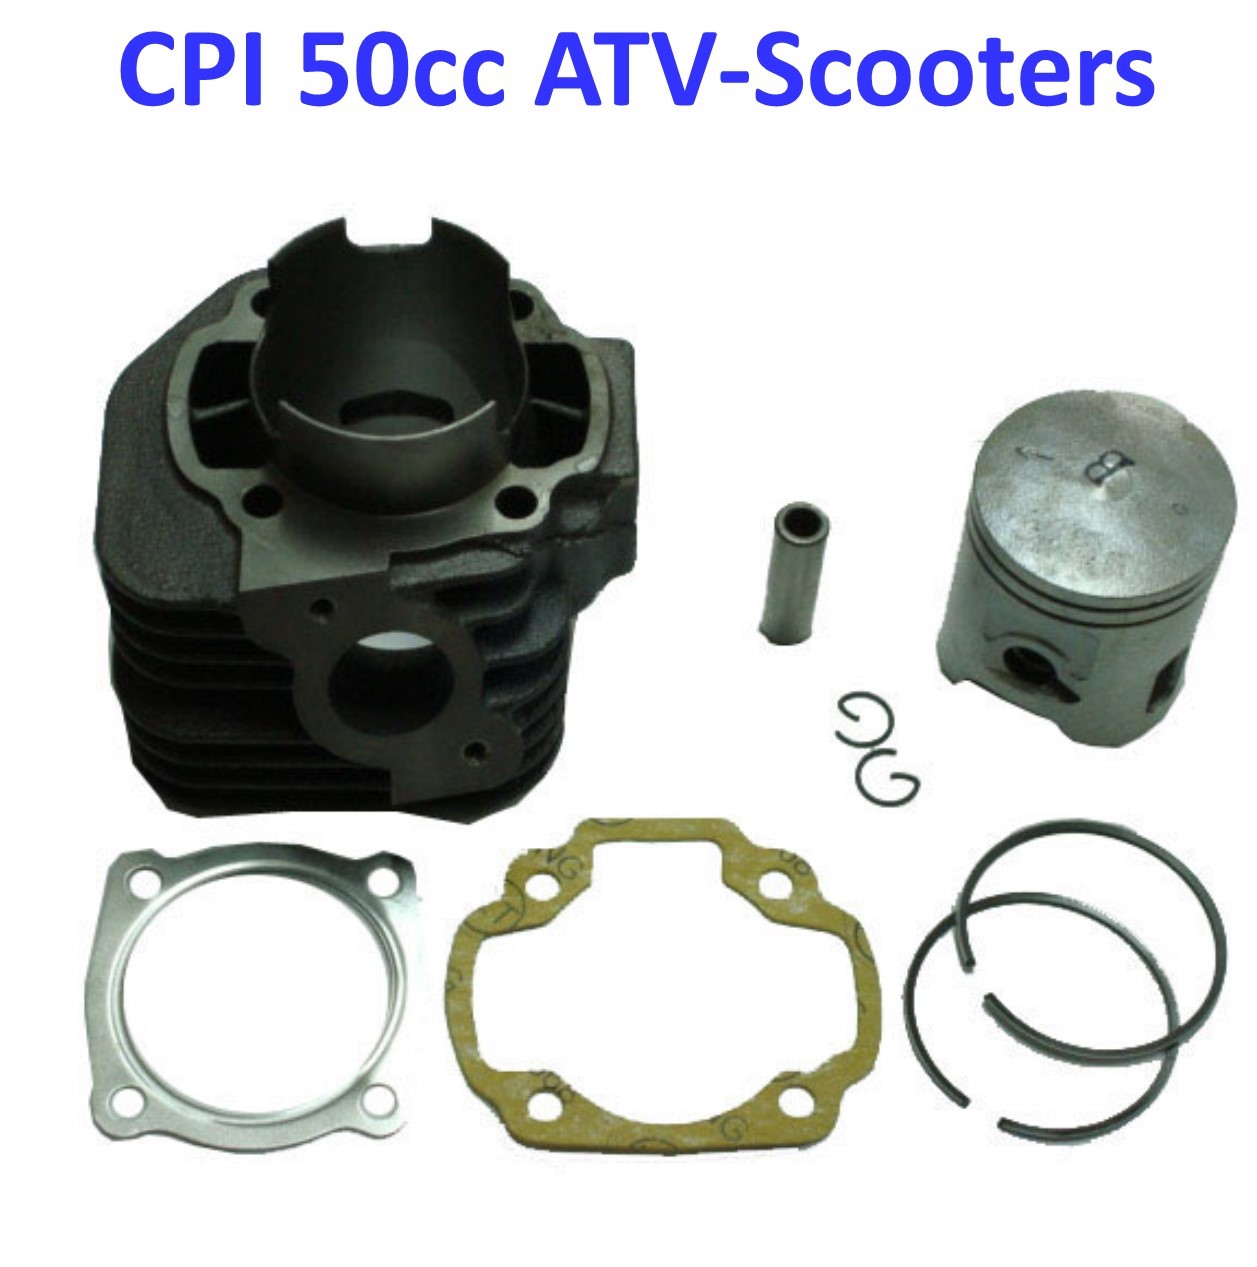 Cylinder Piston Top End Kit 49cc 2 Stroke ATVs, Scooters B=40mm Pin=12mm H=64mm CPI Models Only